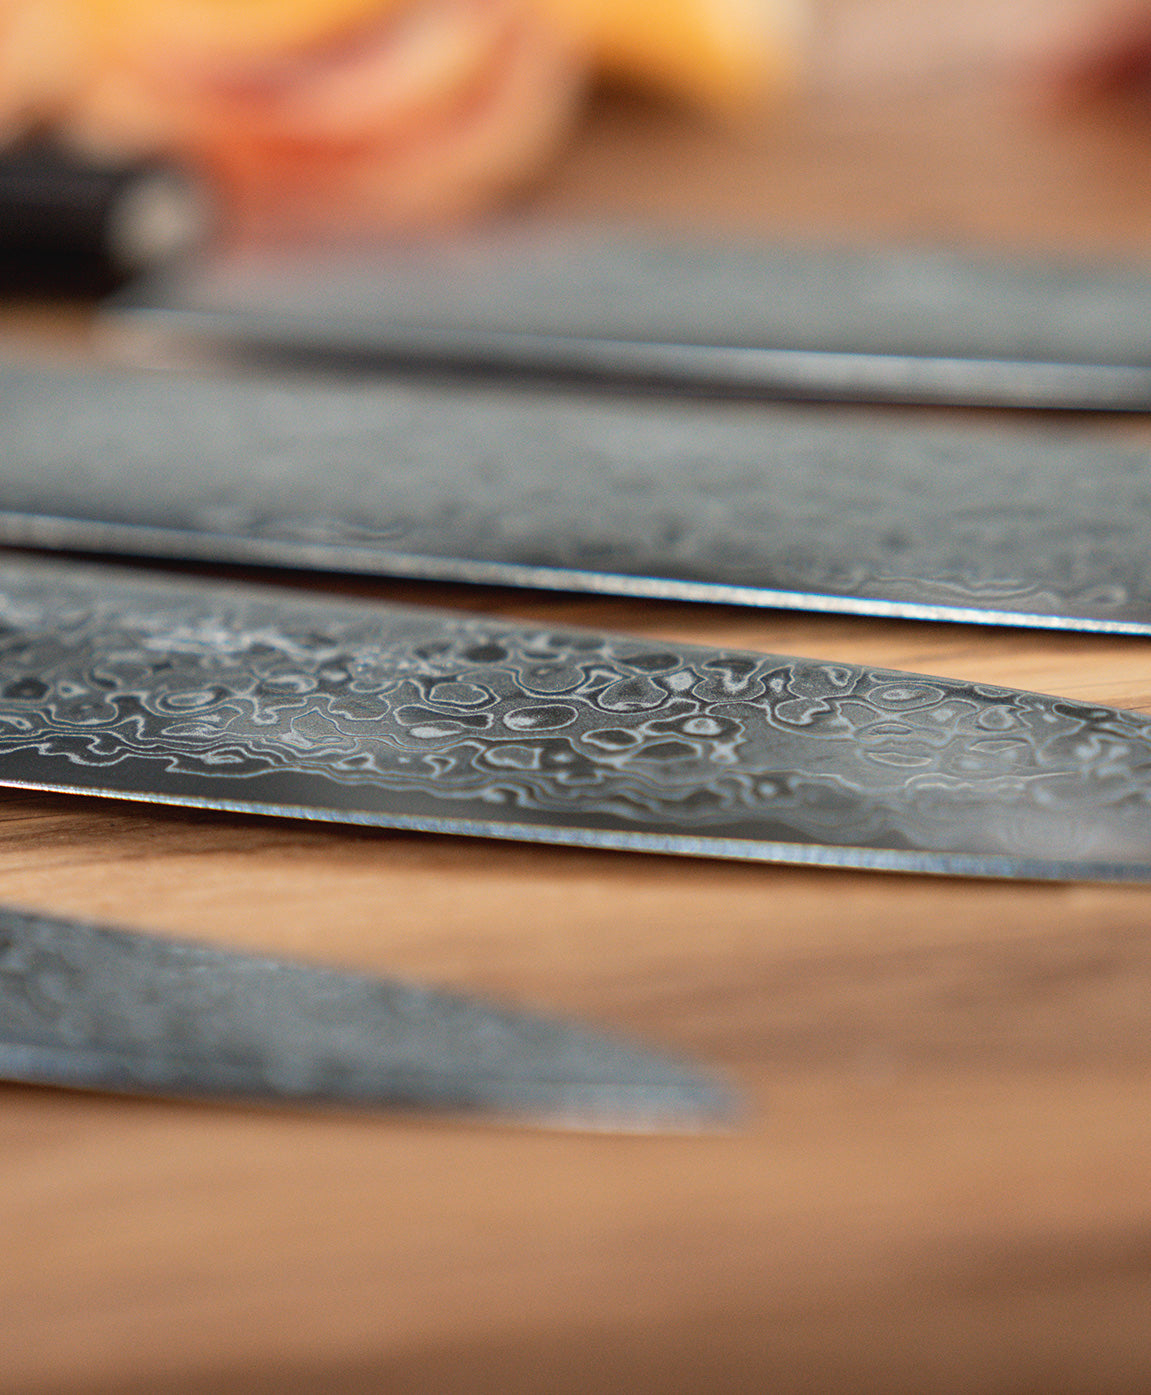 Element Knife Company: One Stop Shop for Home and Pro Chefs